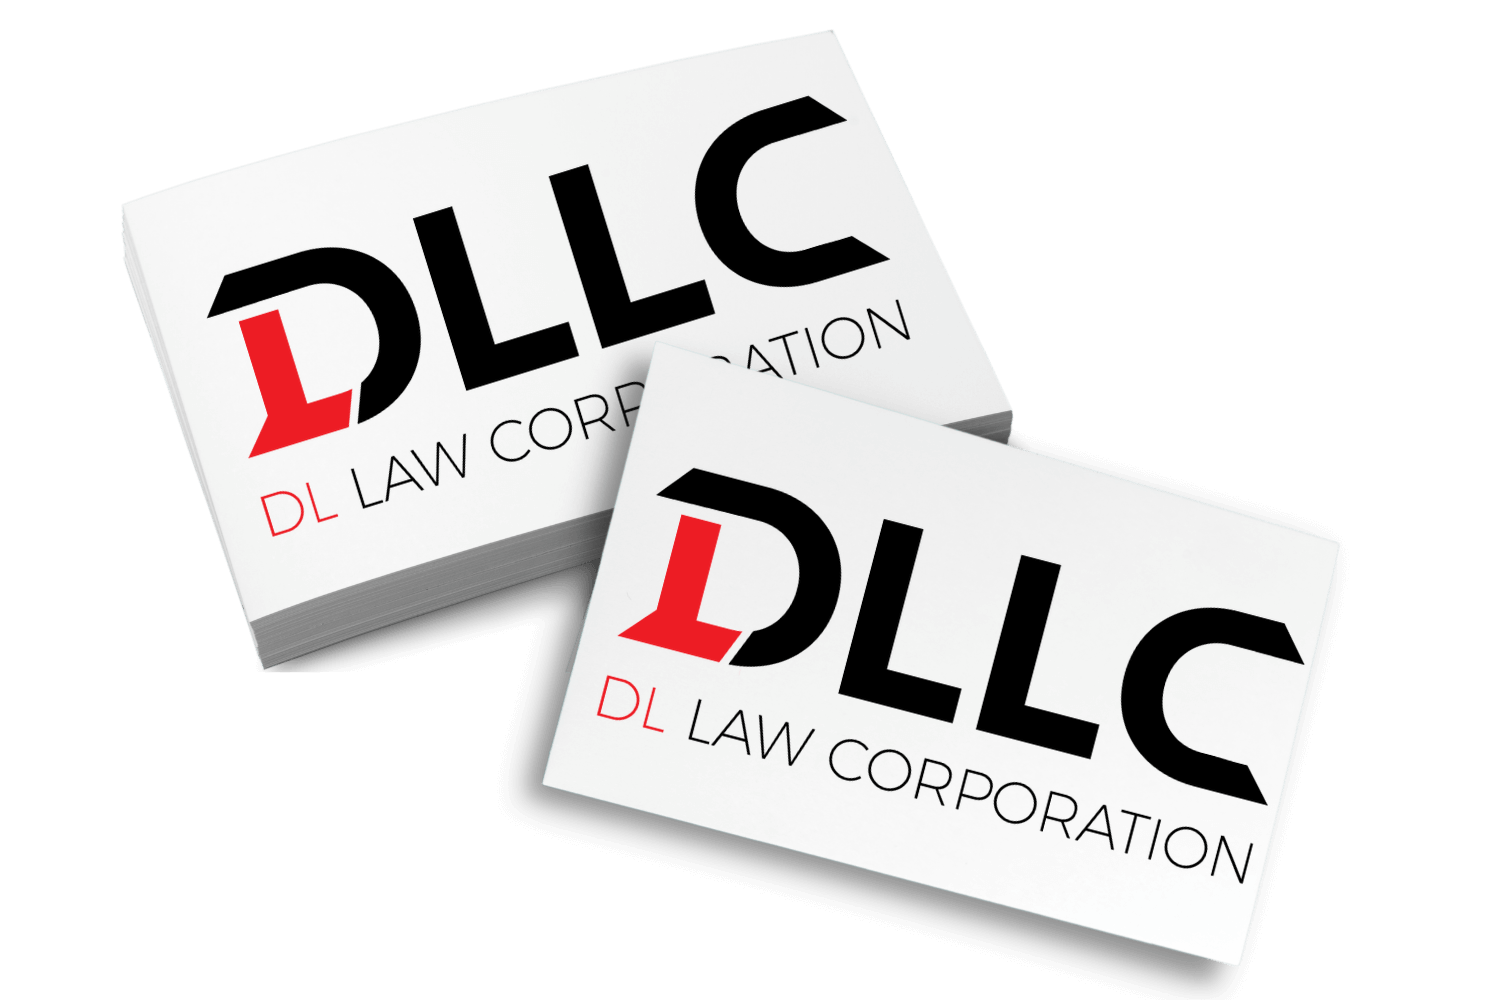 DLLC company logo business card mockup graphic design at Big Red Jelly.